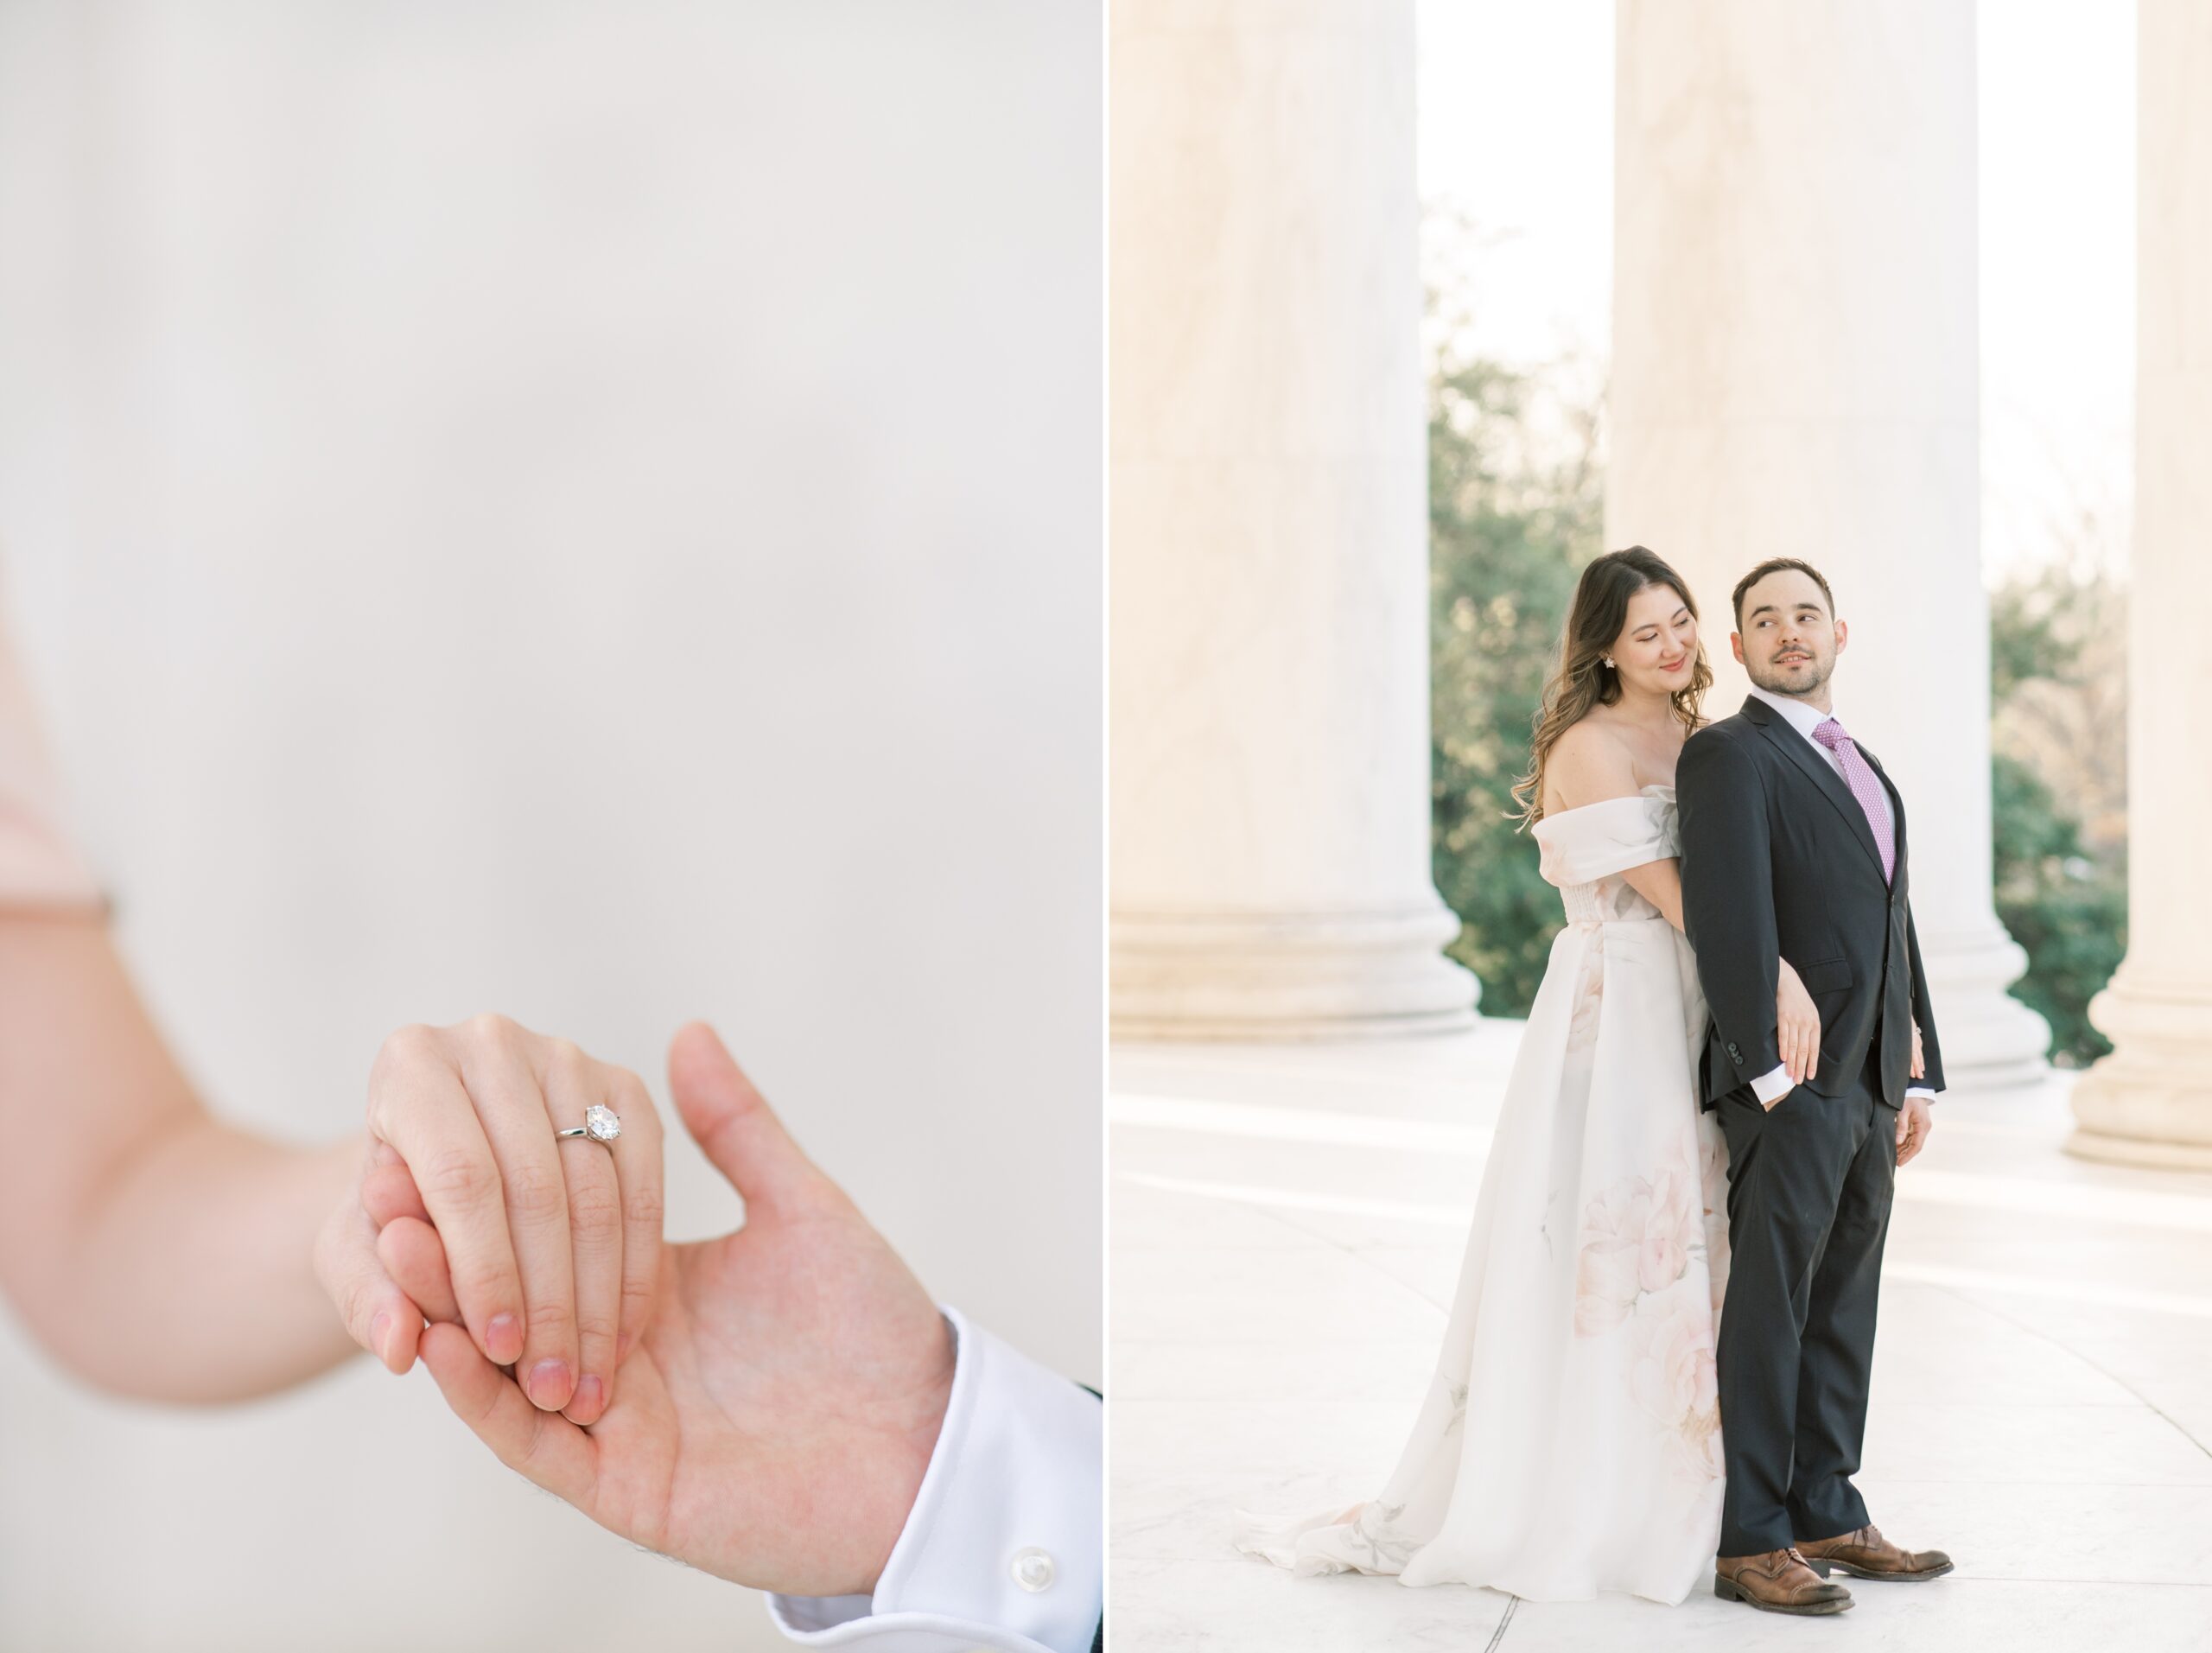 Spring engagement portraits at the Jefferson Memorial in Washington, DC. Includes a few photos amongst the iconic Cherry Blossoms!